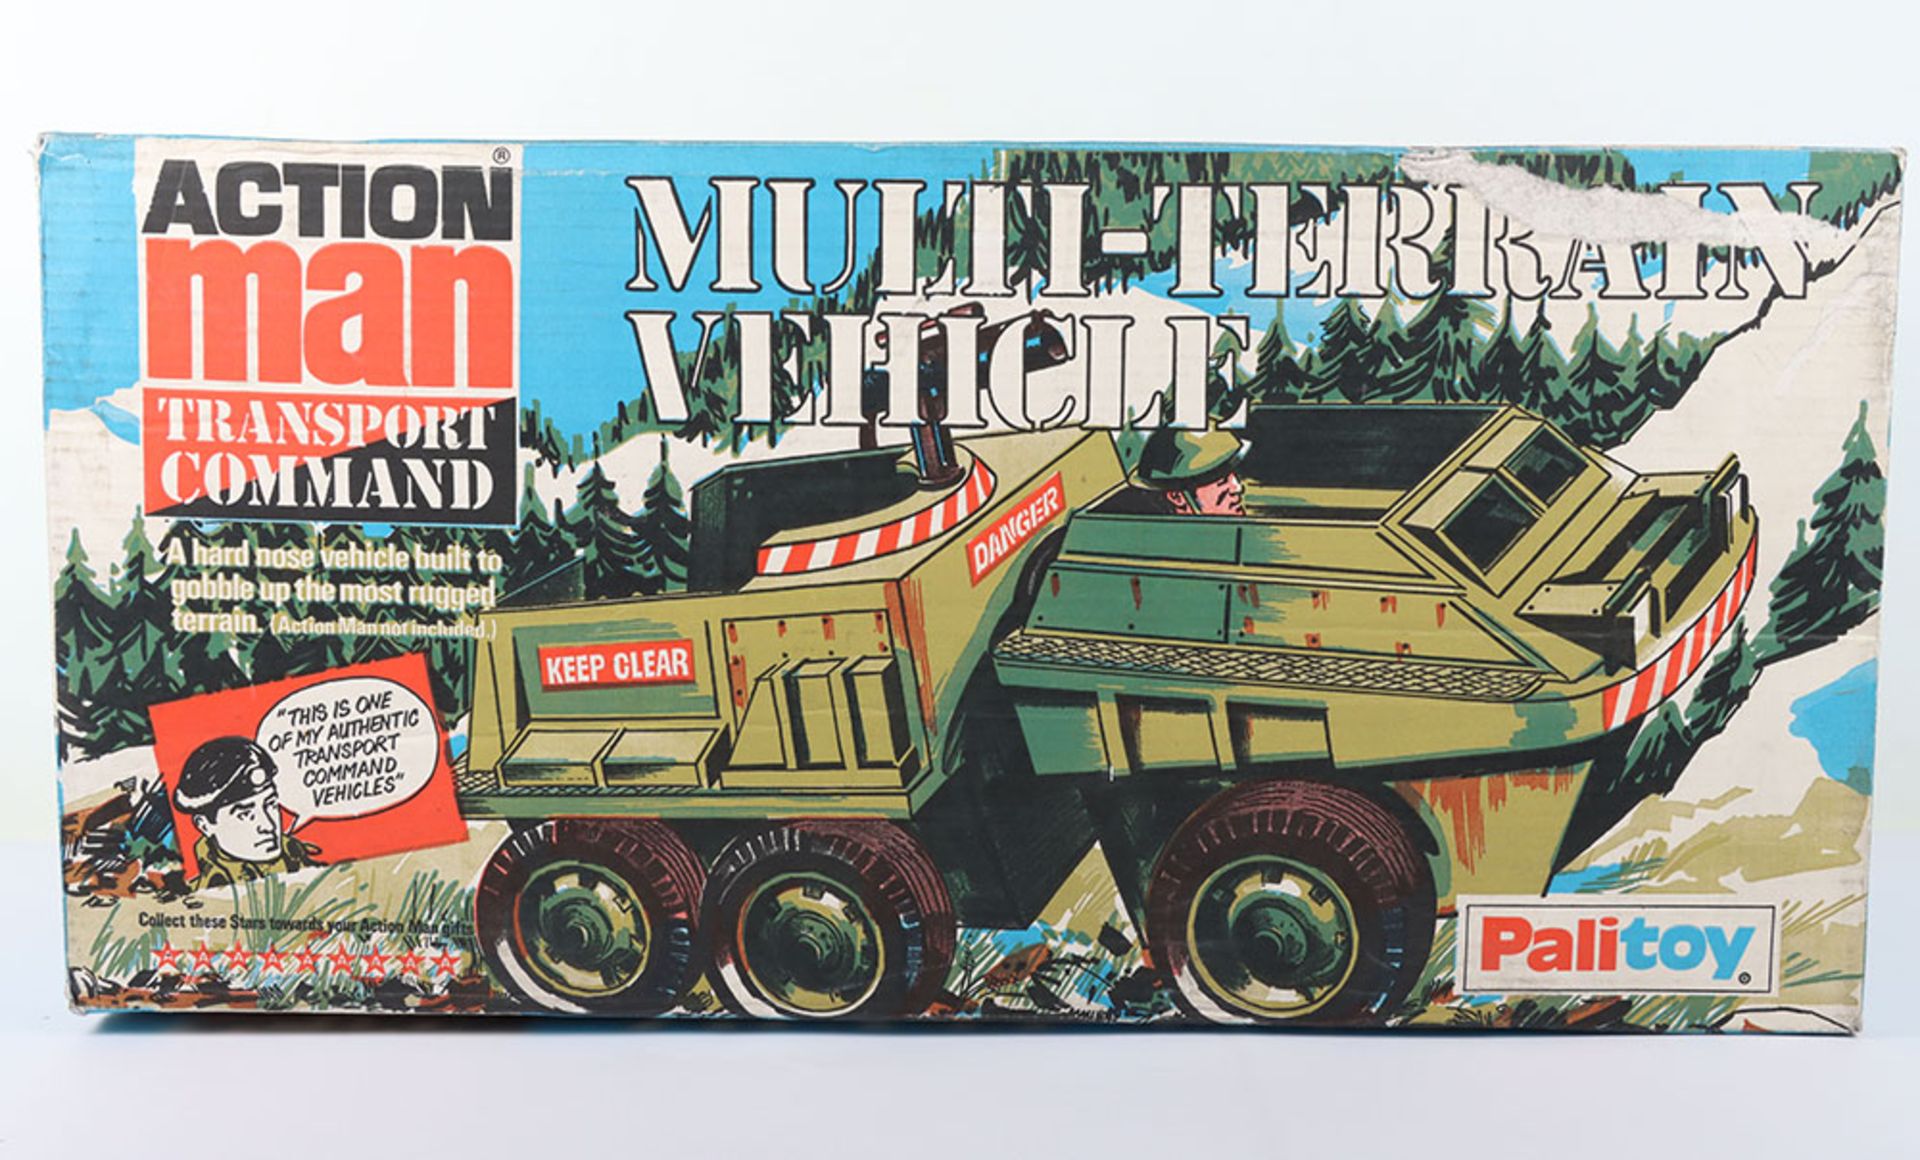 Palitoy Action Man Transport Command Multi-Terrain Vehicle - Image 5 of 8